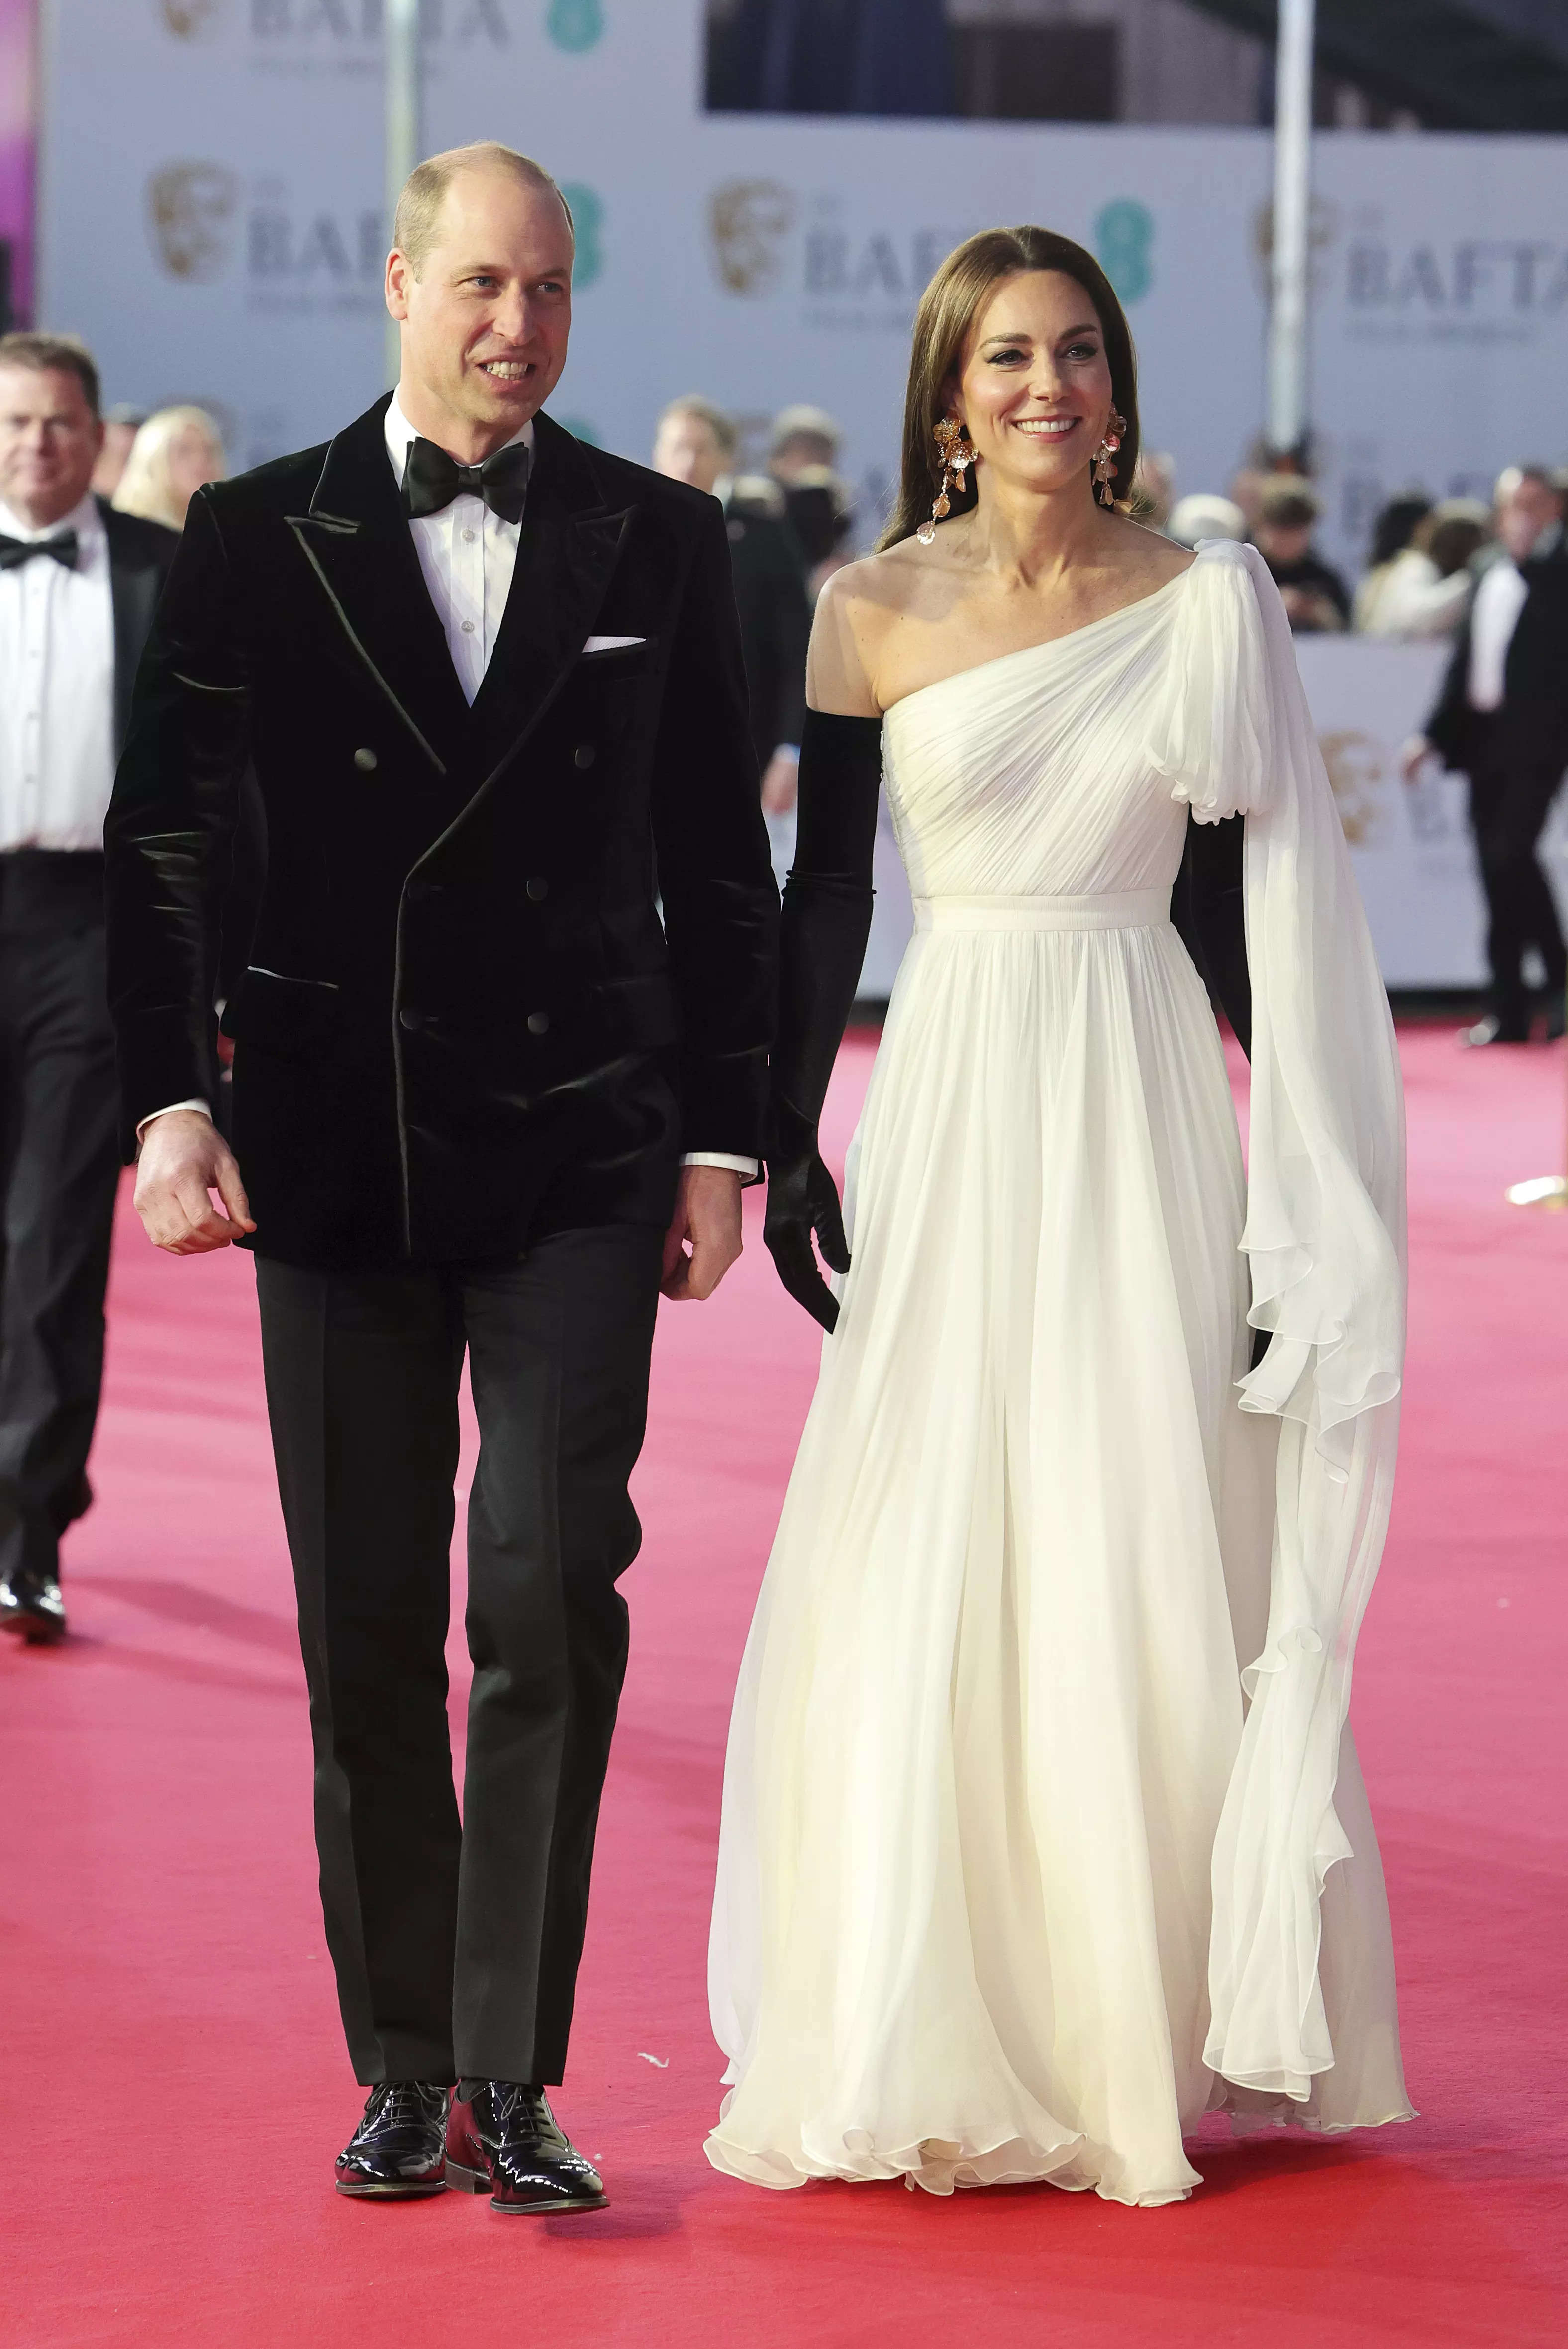 Kate Middleton Attends the BAFTA Awards In Stunning White Gown